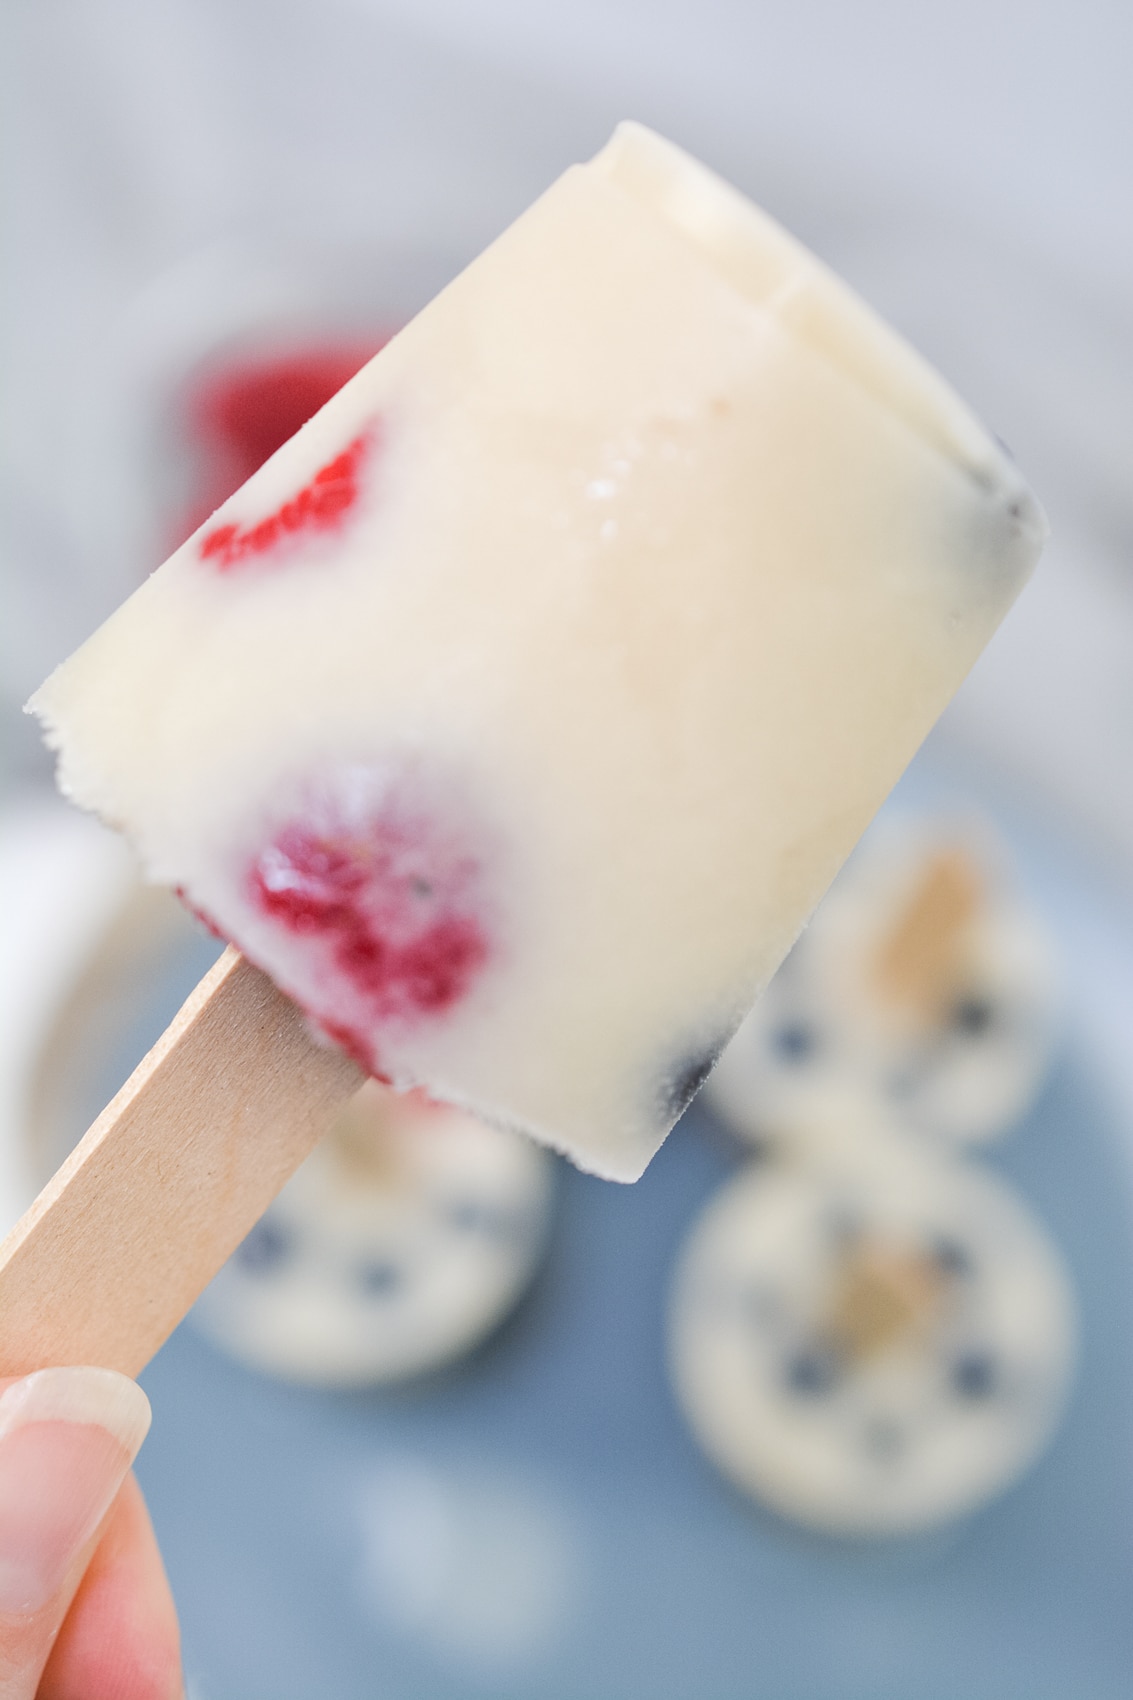 close up photo of a low-carb popsicle showing raspberries 